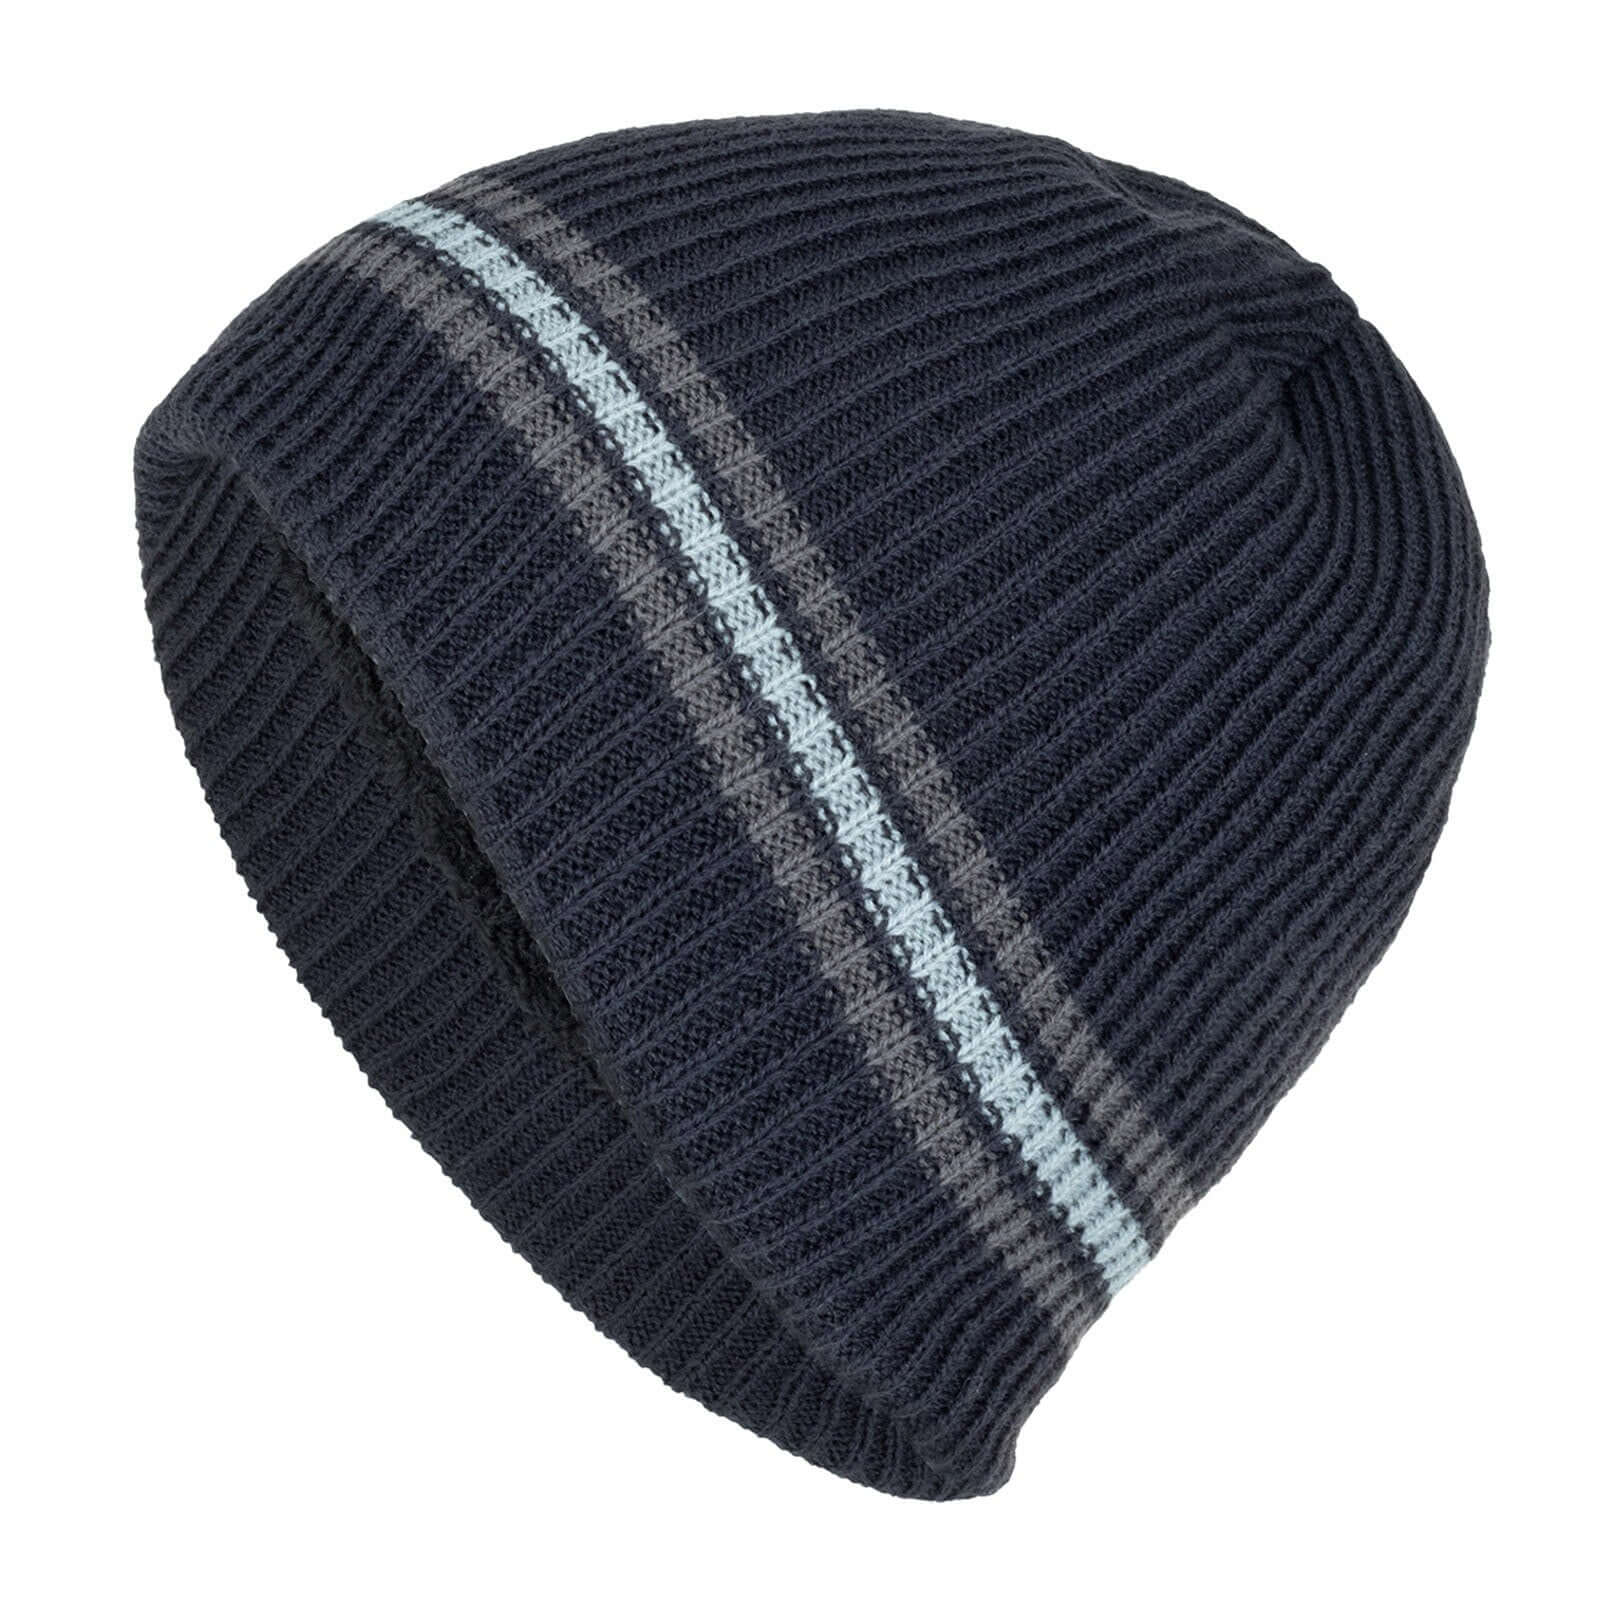 Knitted Striped Beanie Image